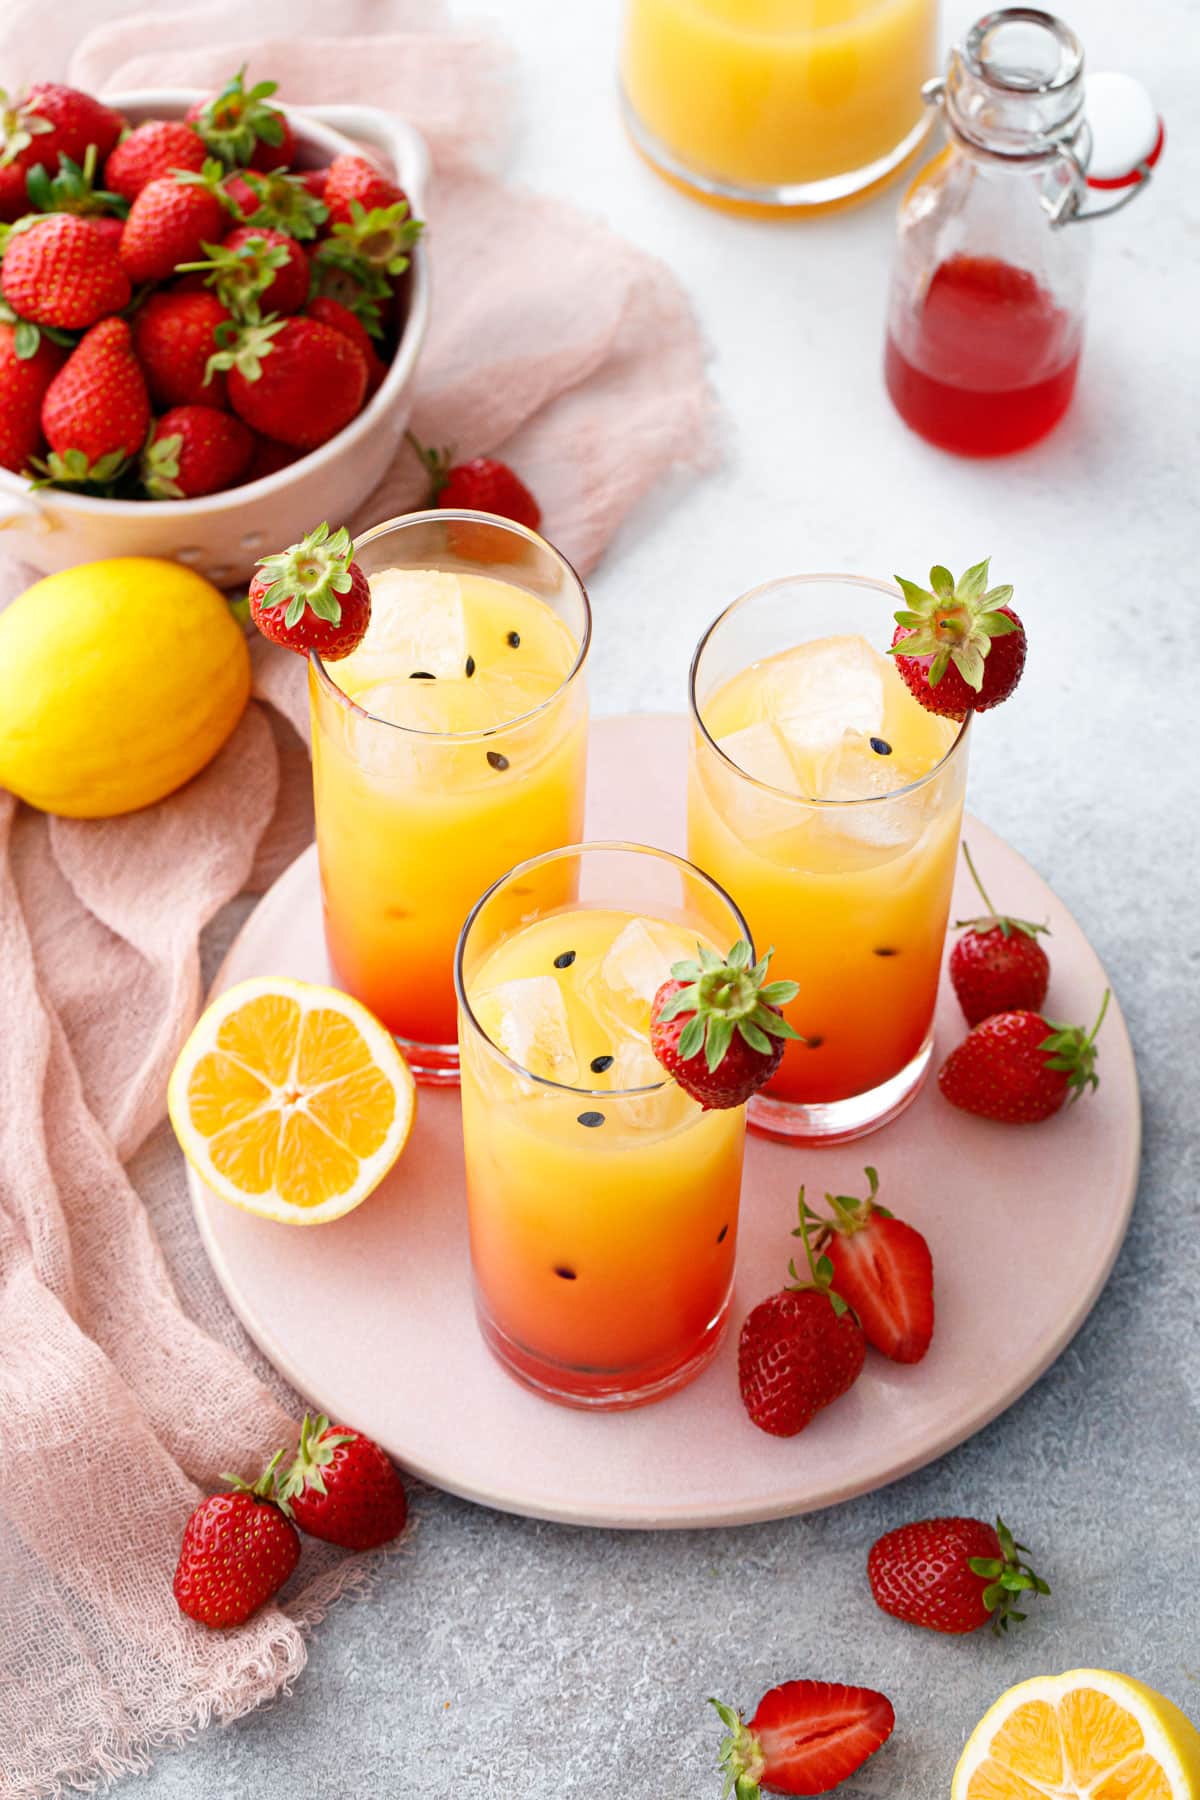 Three glasses of Strawberry Passionfruit Lemonade, colored with a gradient red to yellow with black passionfruit seeds.